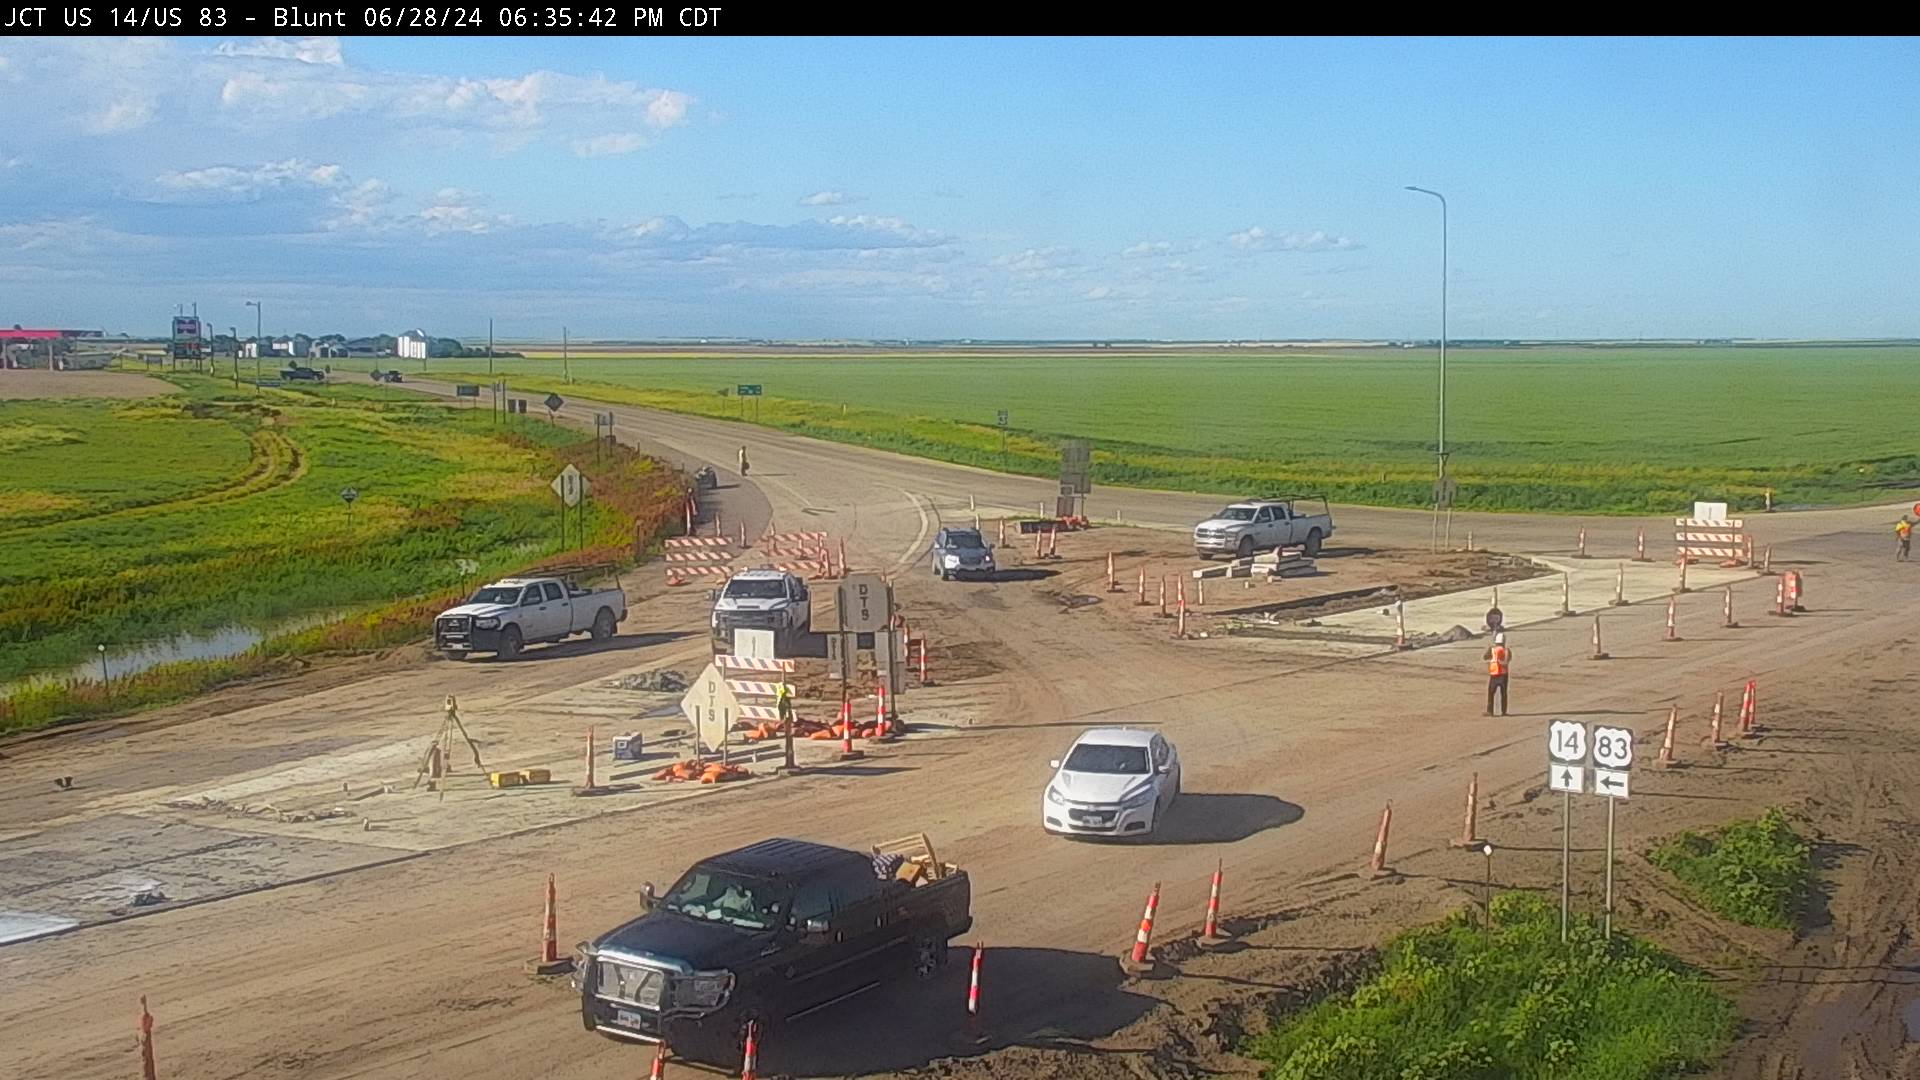 Traffic Cam 4 miles west of town at US-14 & US-83 - North Player